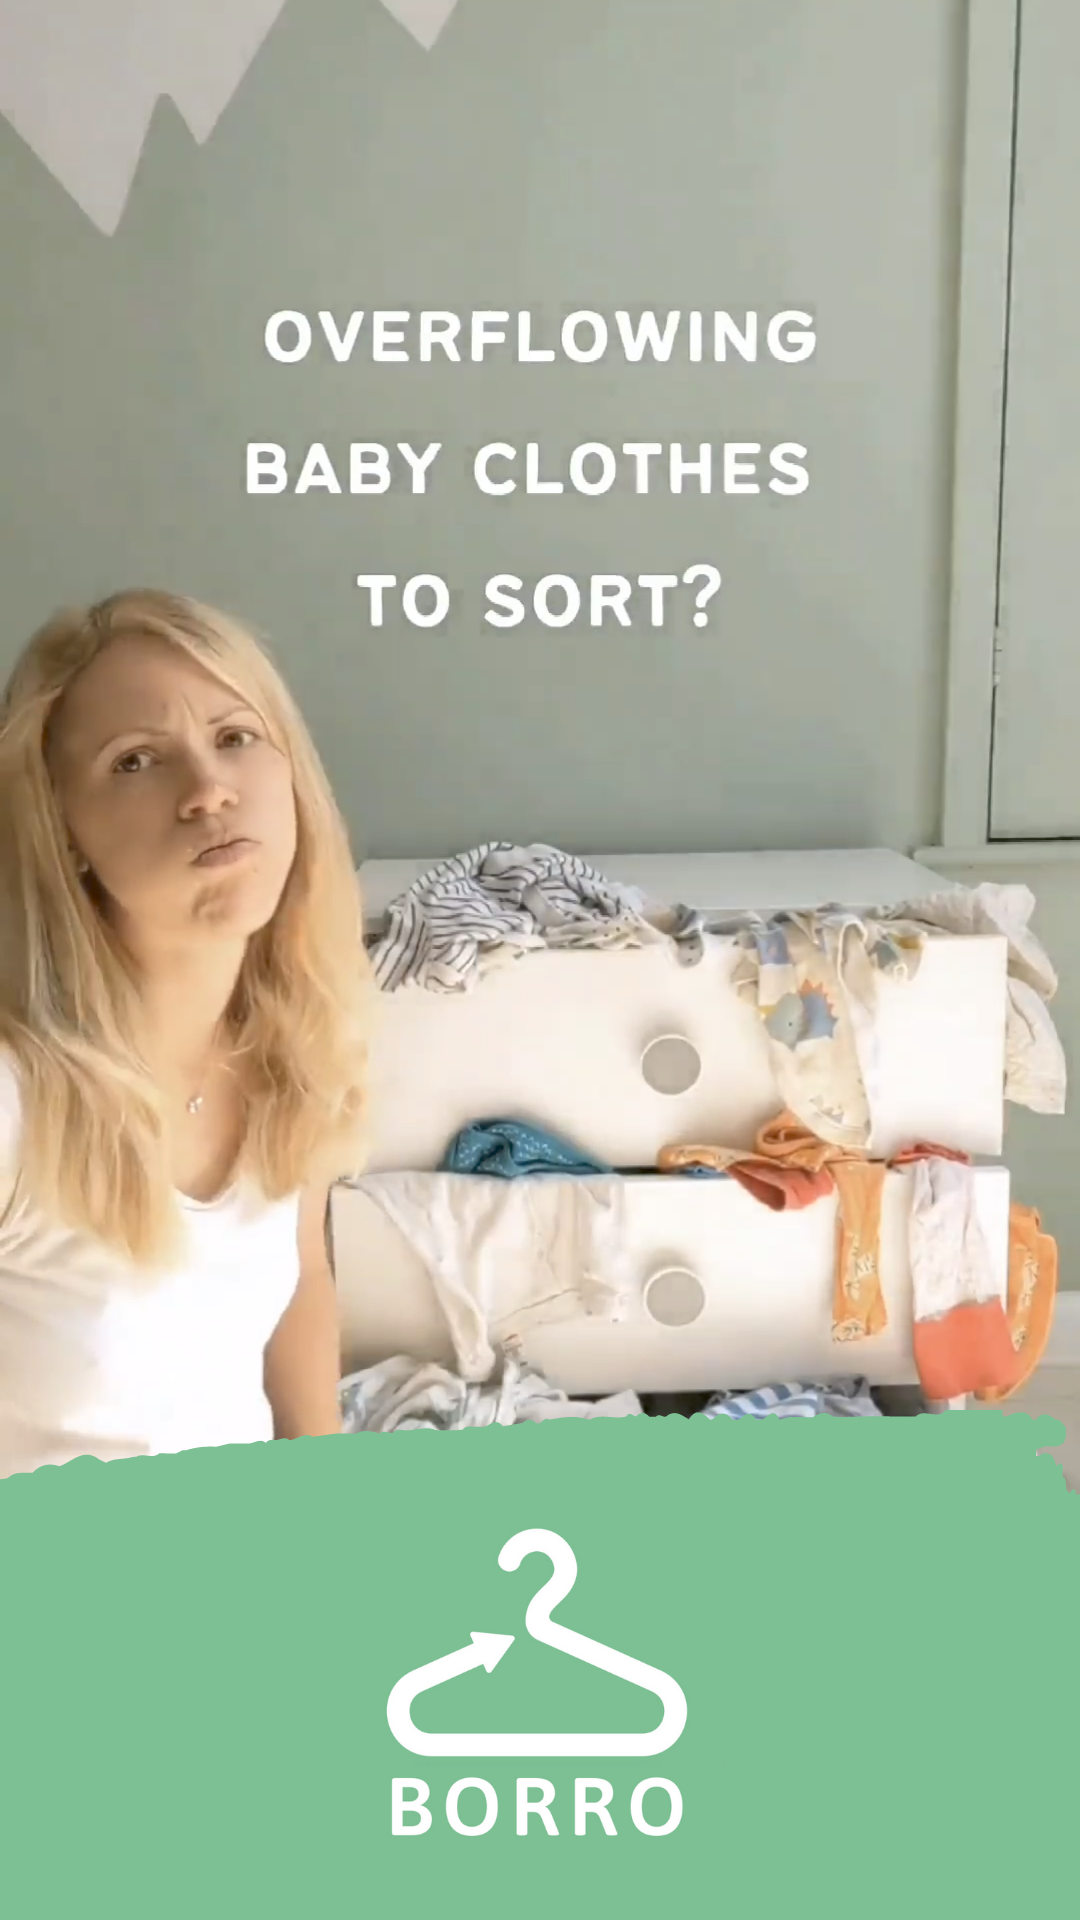 Overflowing baby clothes to sort?